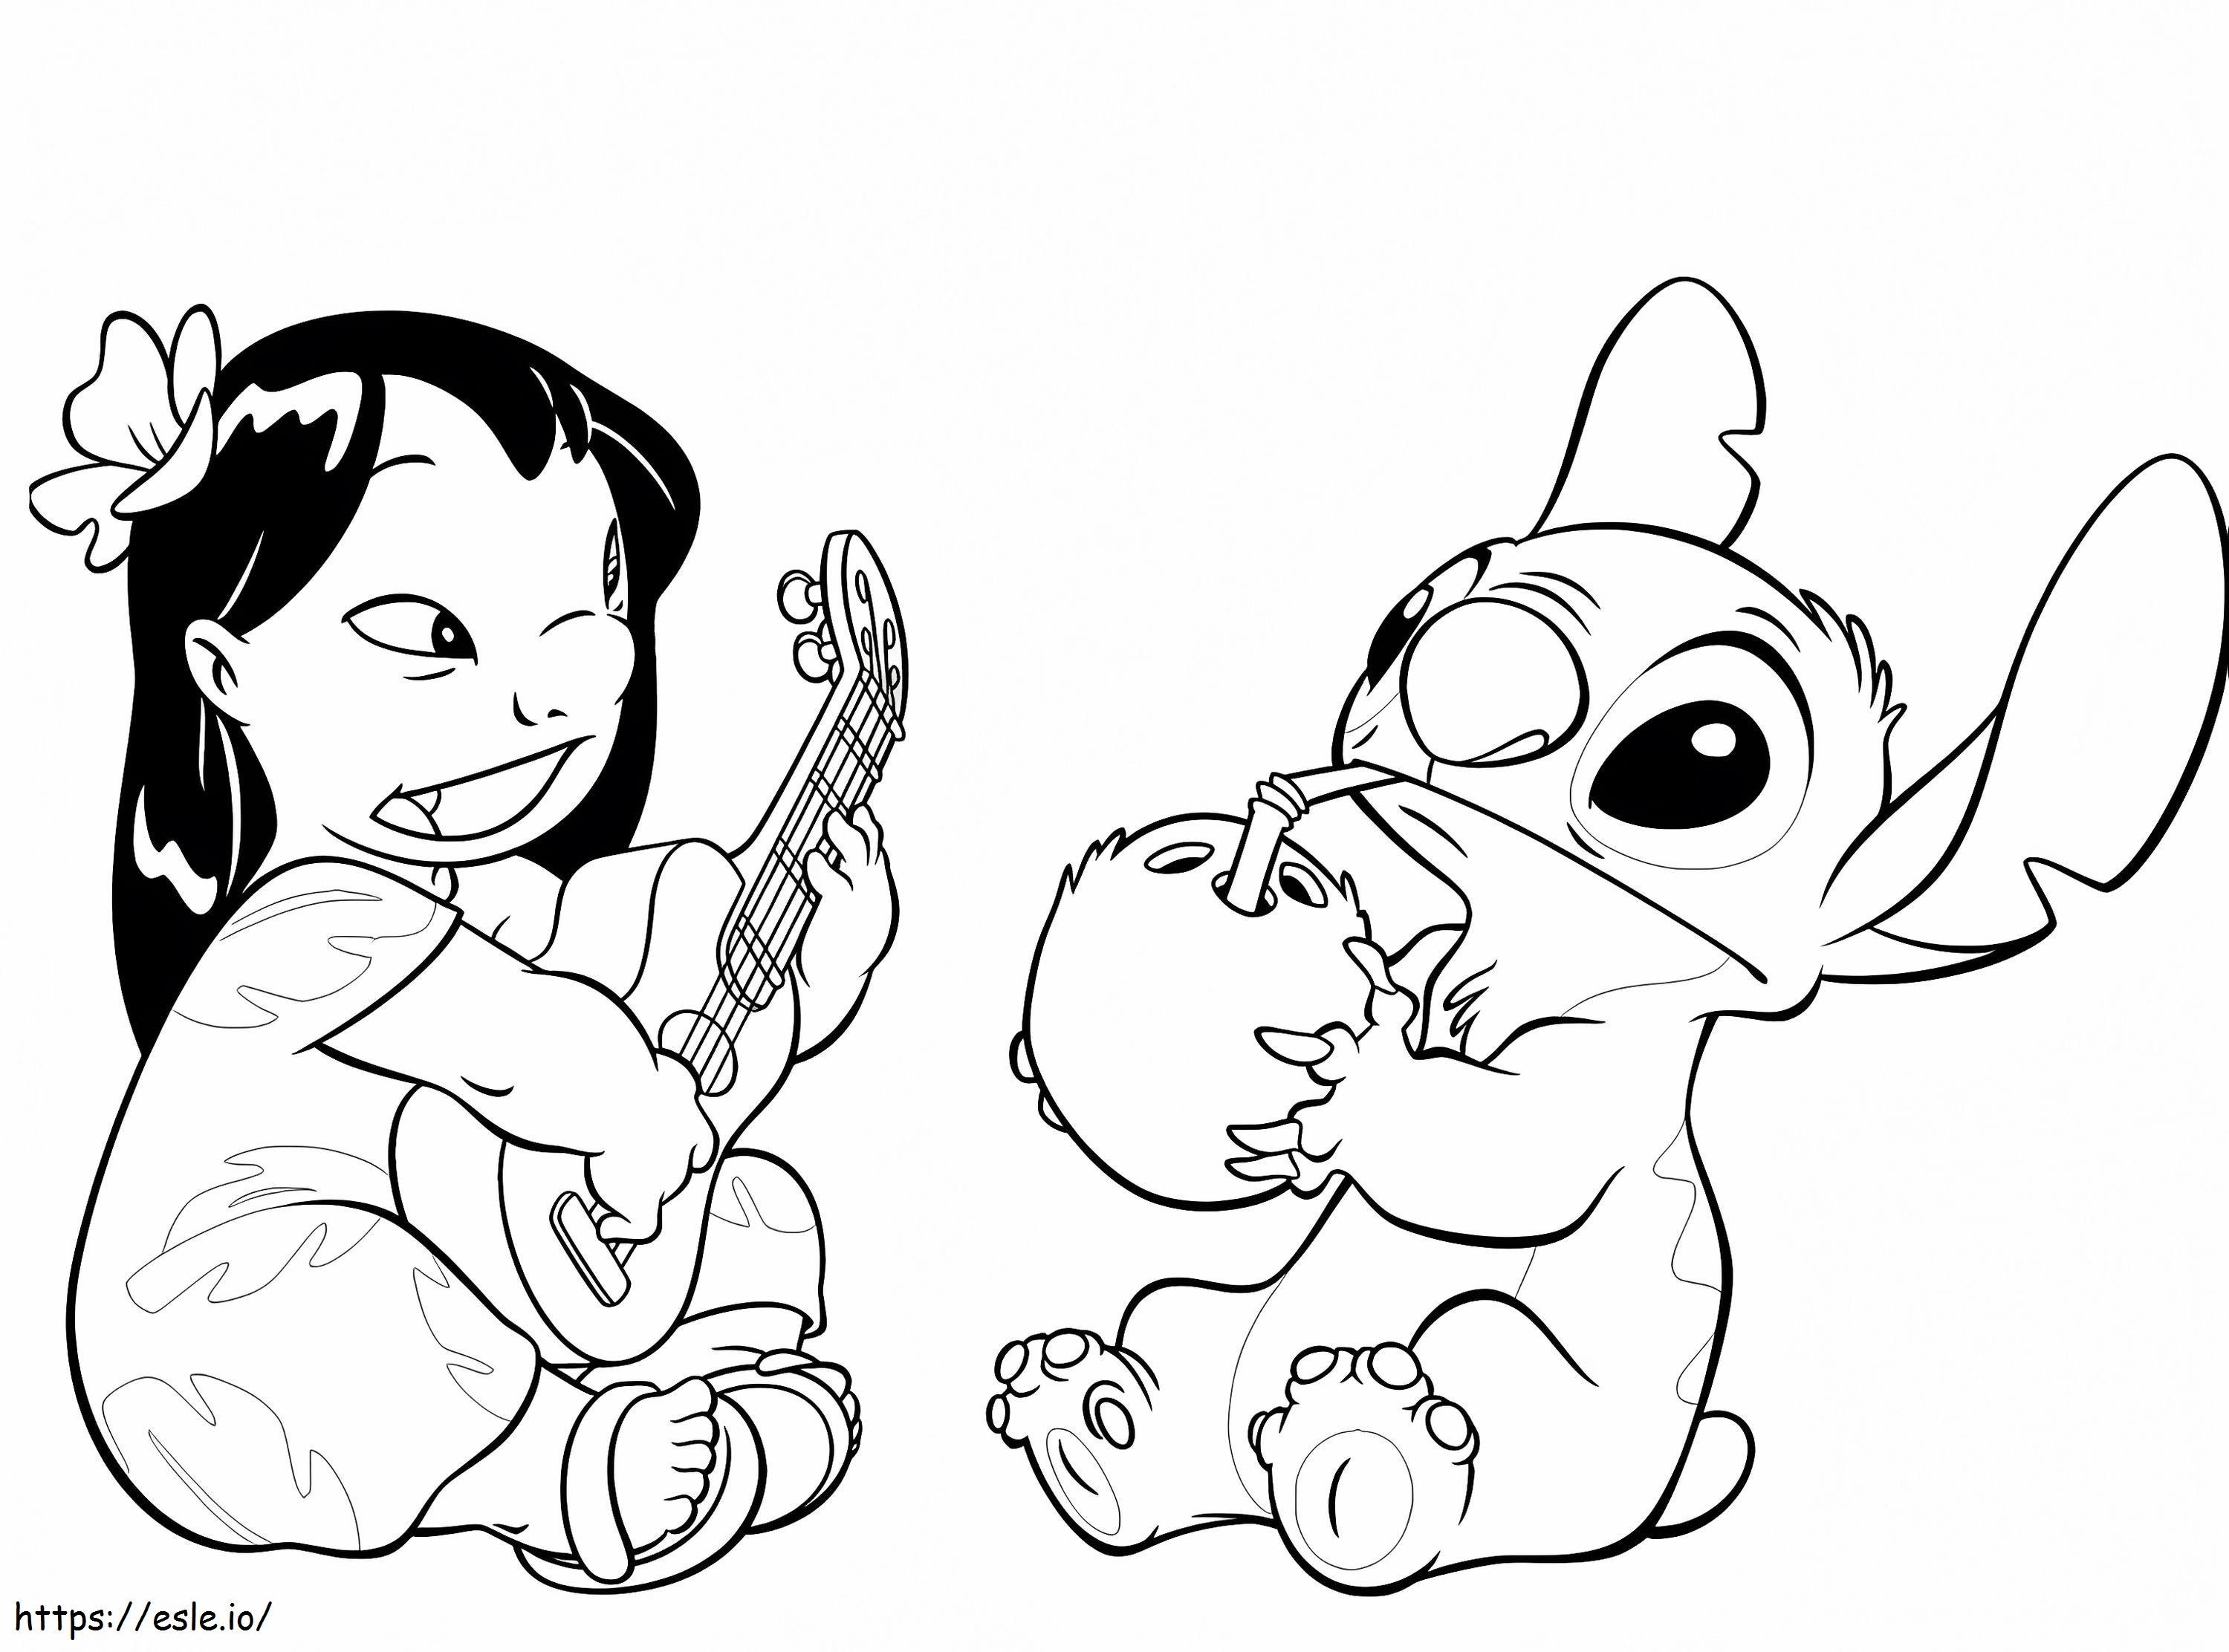 1559978562 Lilo And Stitch A4 coloring page